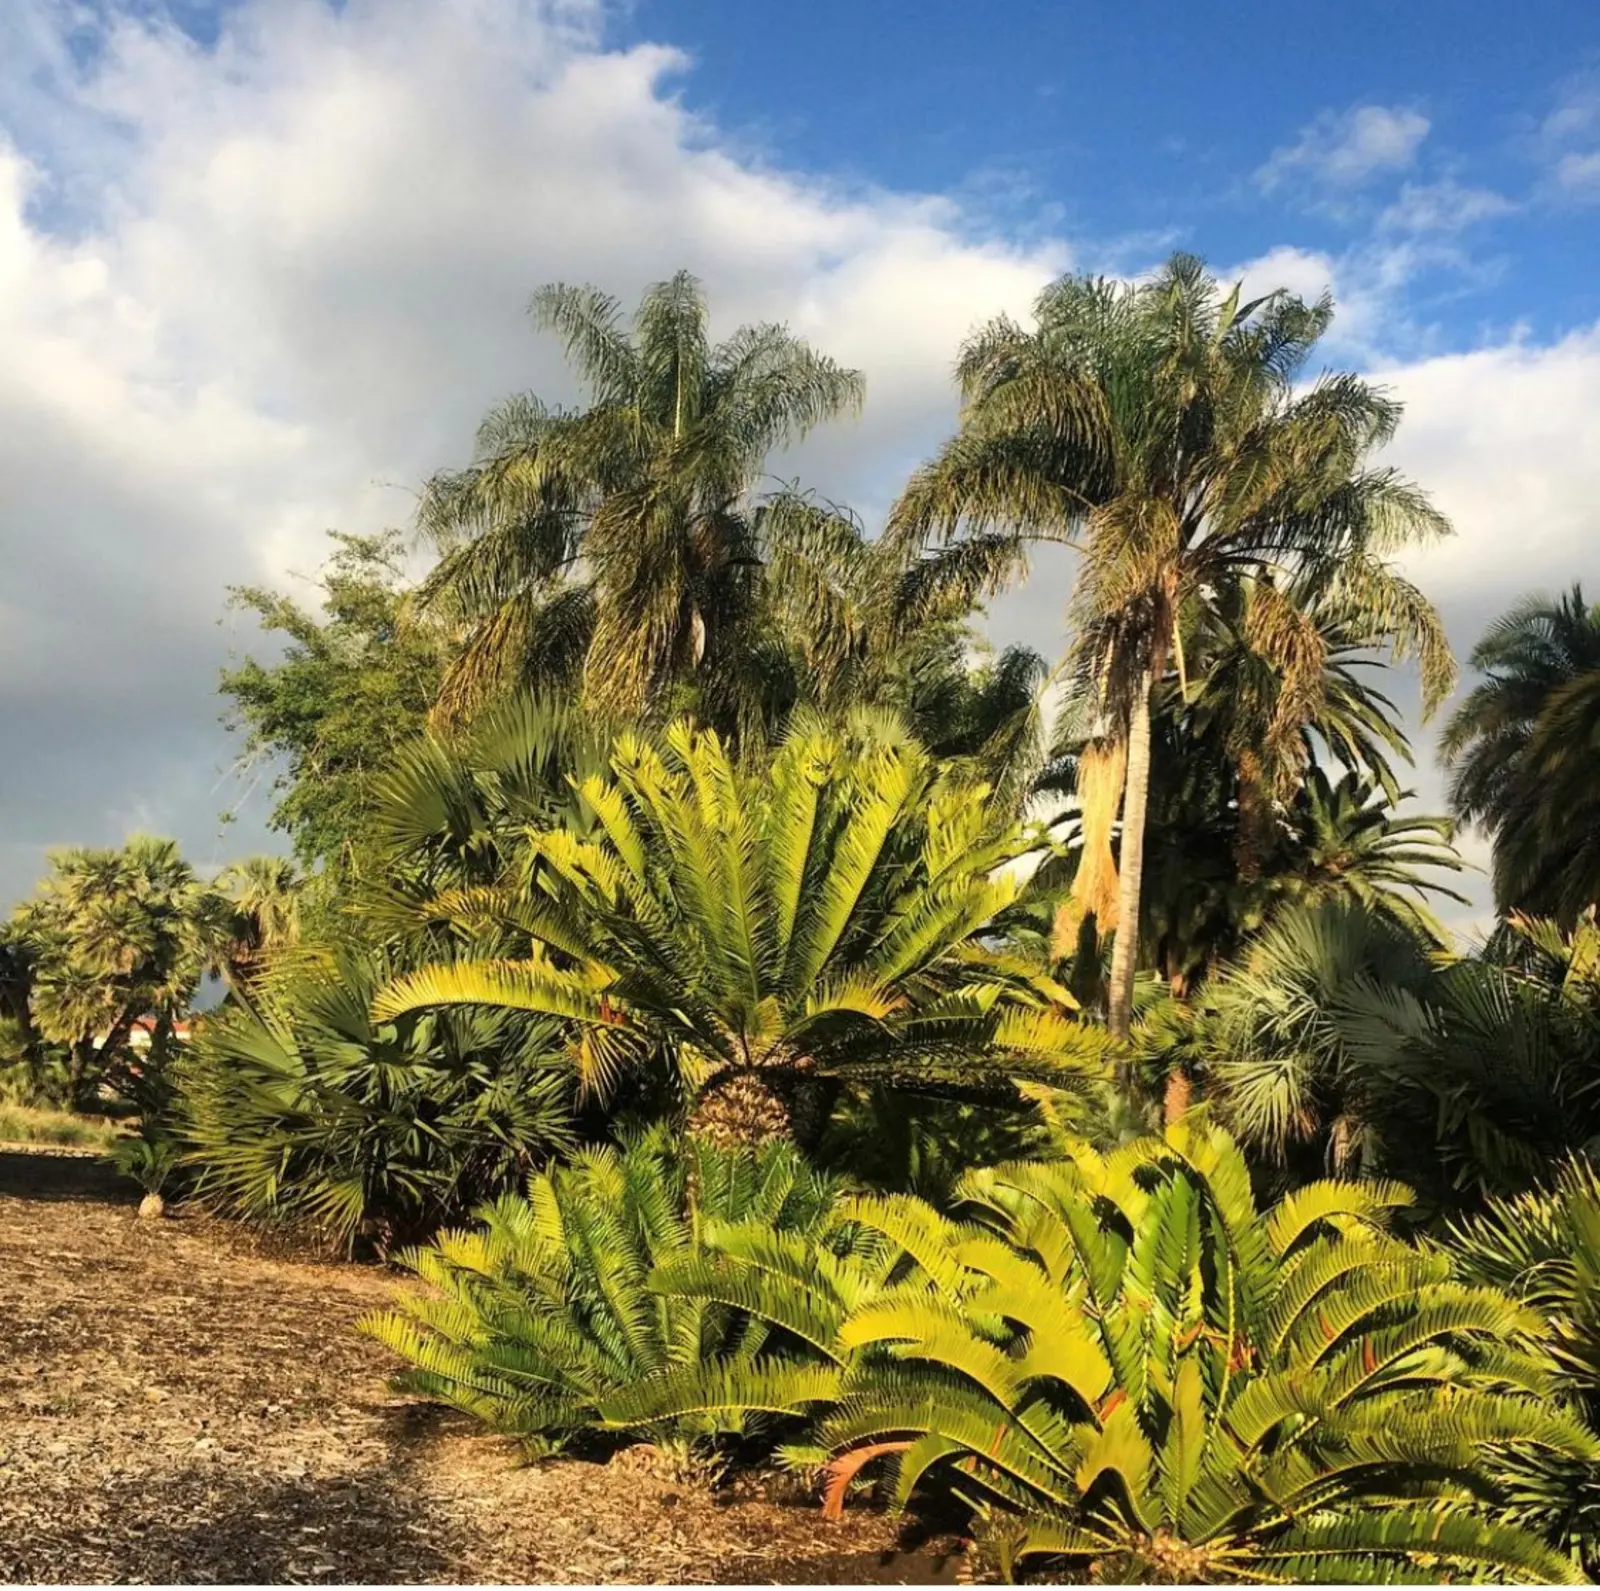 Green cycads in the foreground and tall green palms in the background.